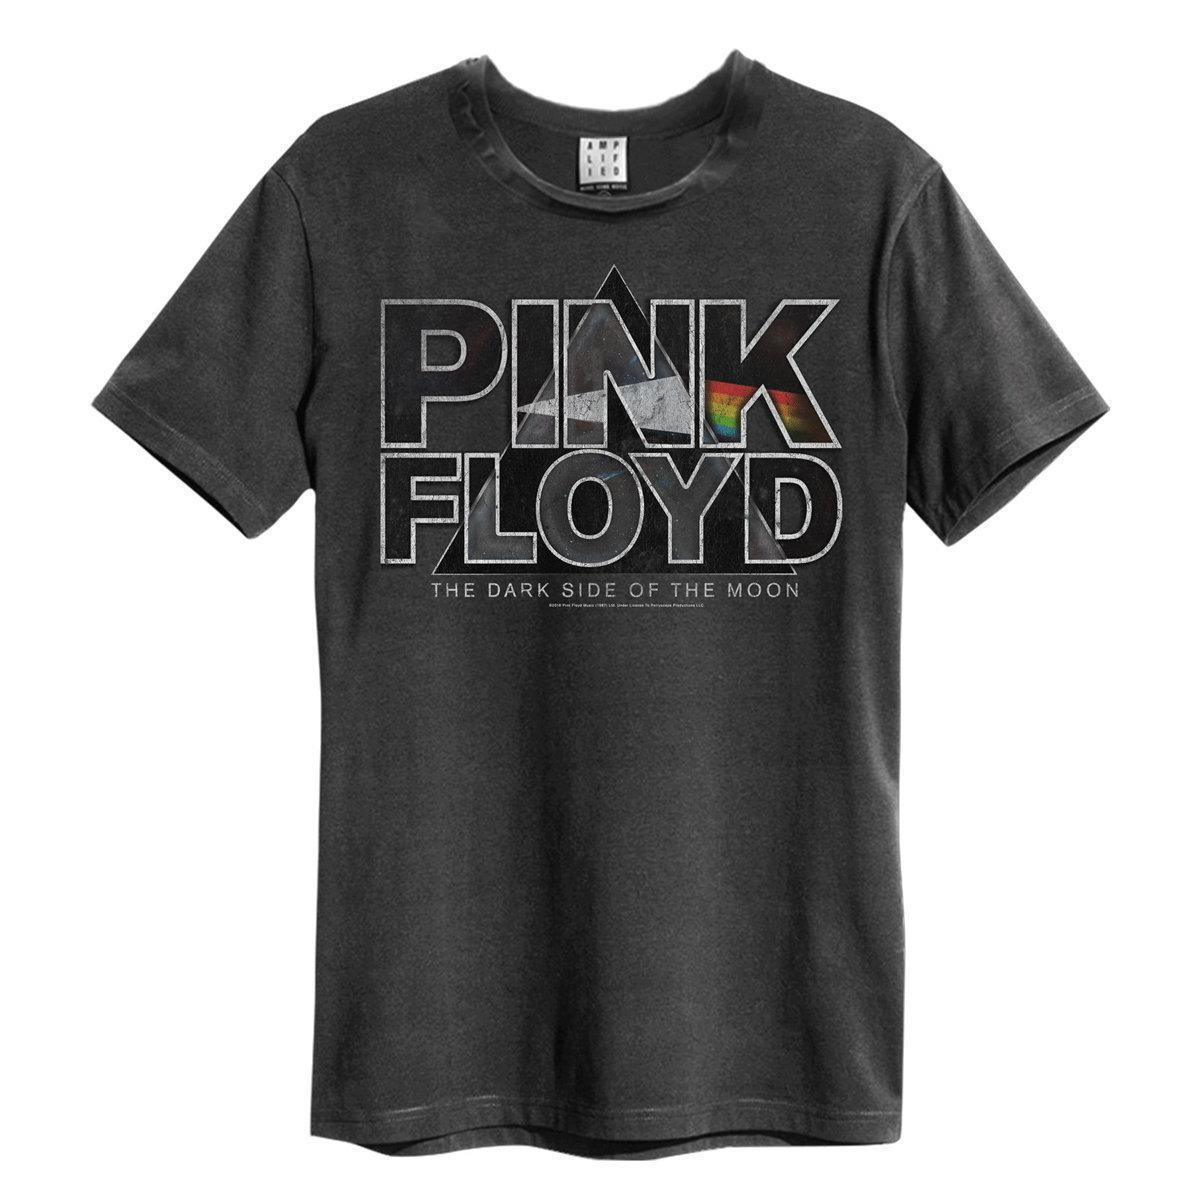 Amplified Unisex Adult Space Pyramid Pink Floyd T-Shirt (Charcoal) (XL)